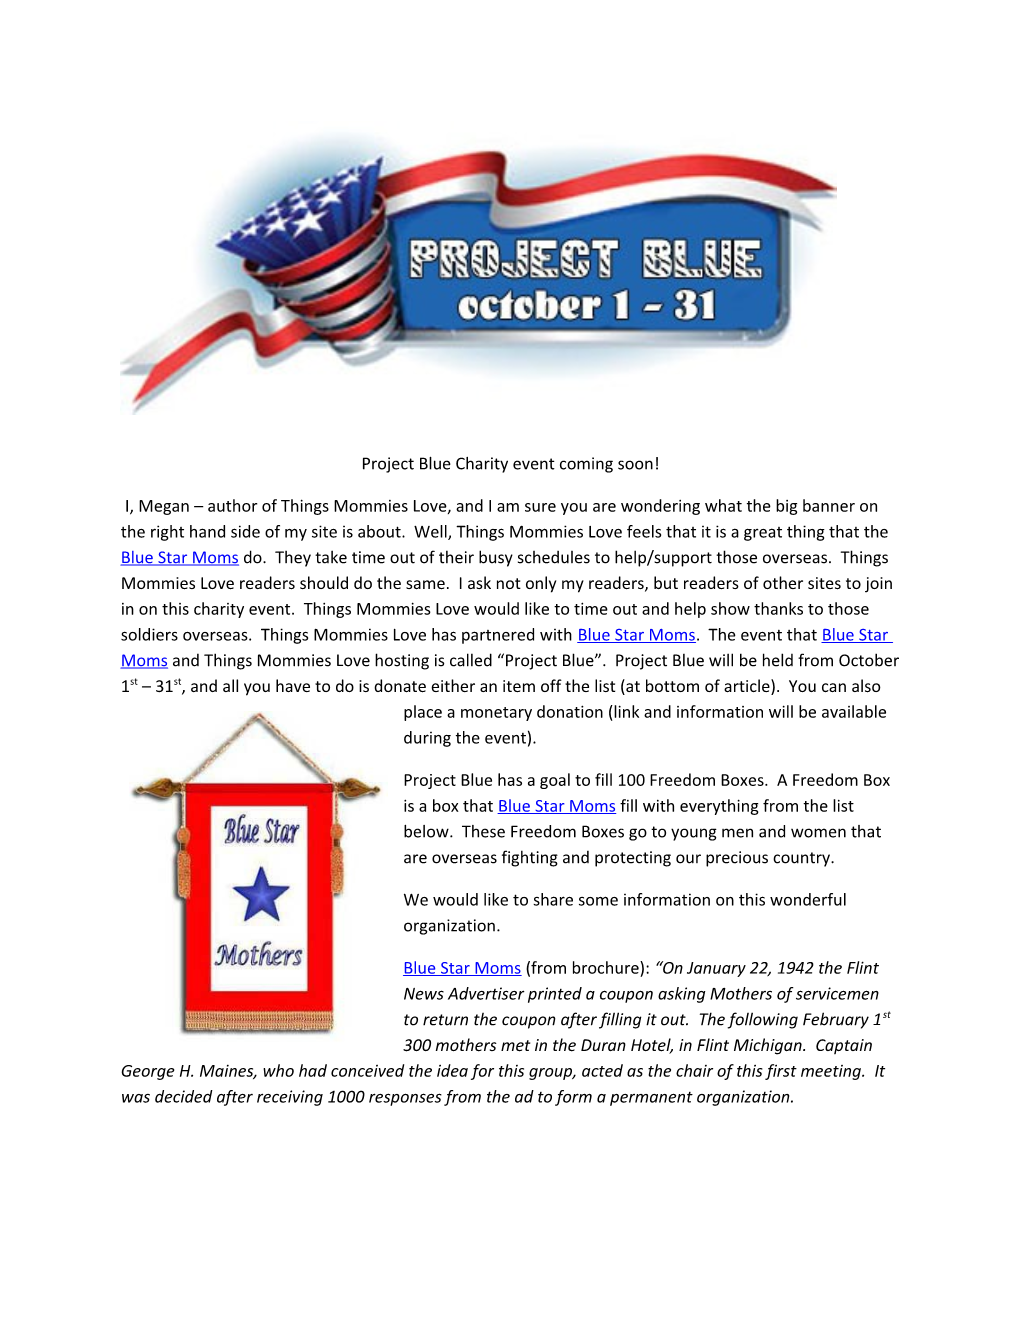 Project Blue Charity Event Coming Soon!